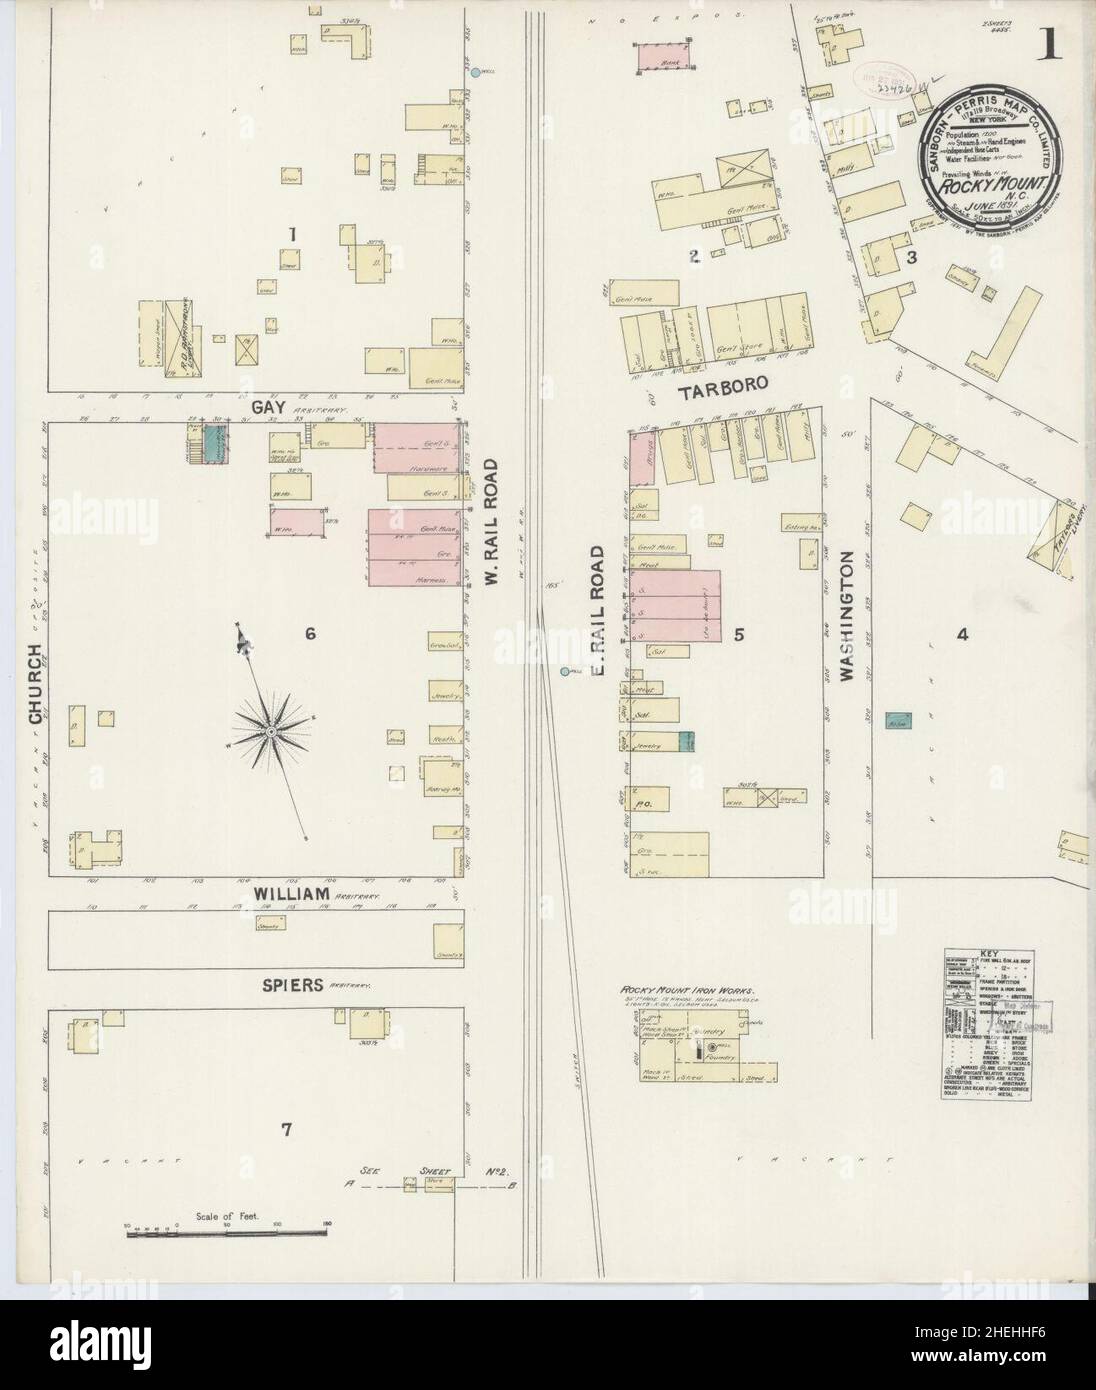 Sanborn Fire Insurance Map from Rocky Mount, Edgecombe And Nash Counties, North Carolina. Stock Photo